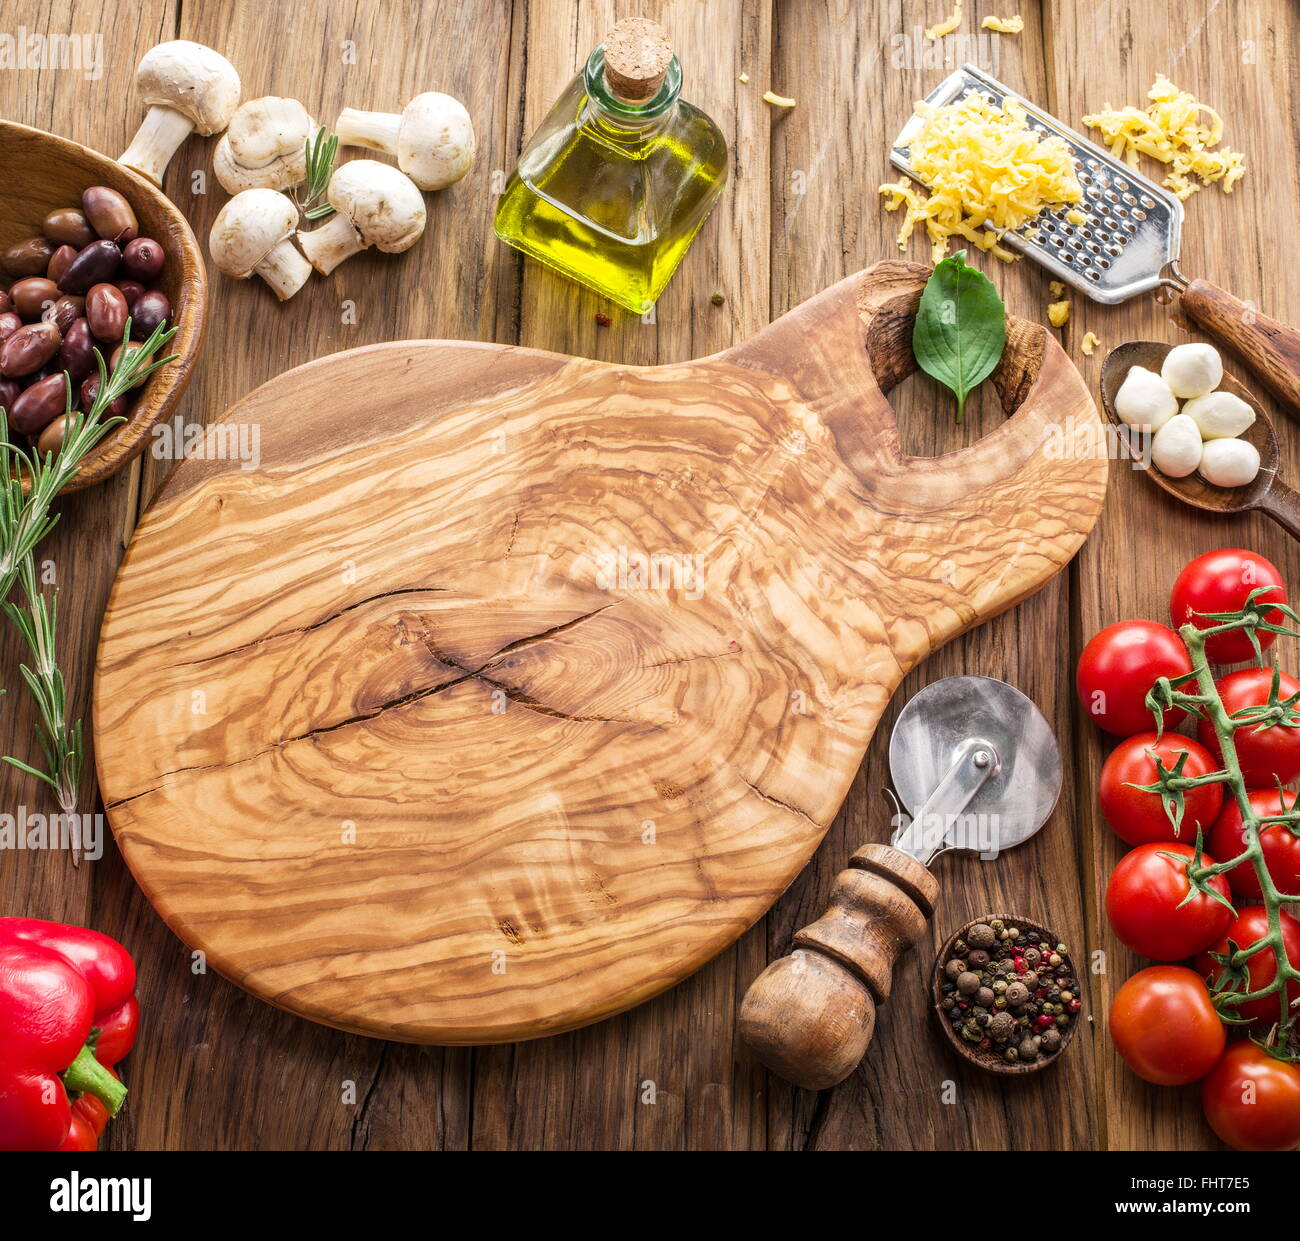 Pizza ingredients: mushrooms, olives, cheese and tomatoes. Stock Photo